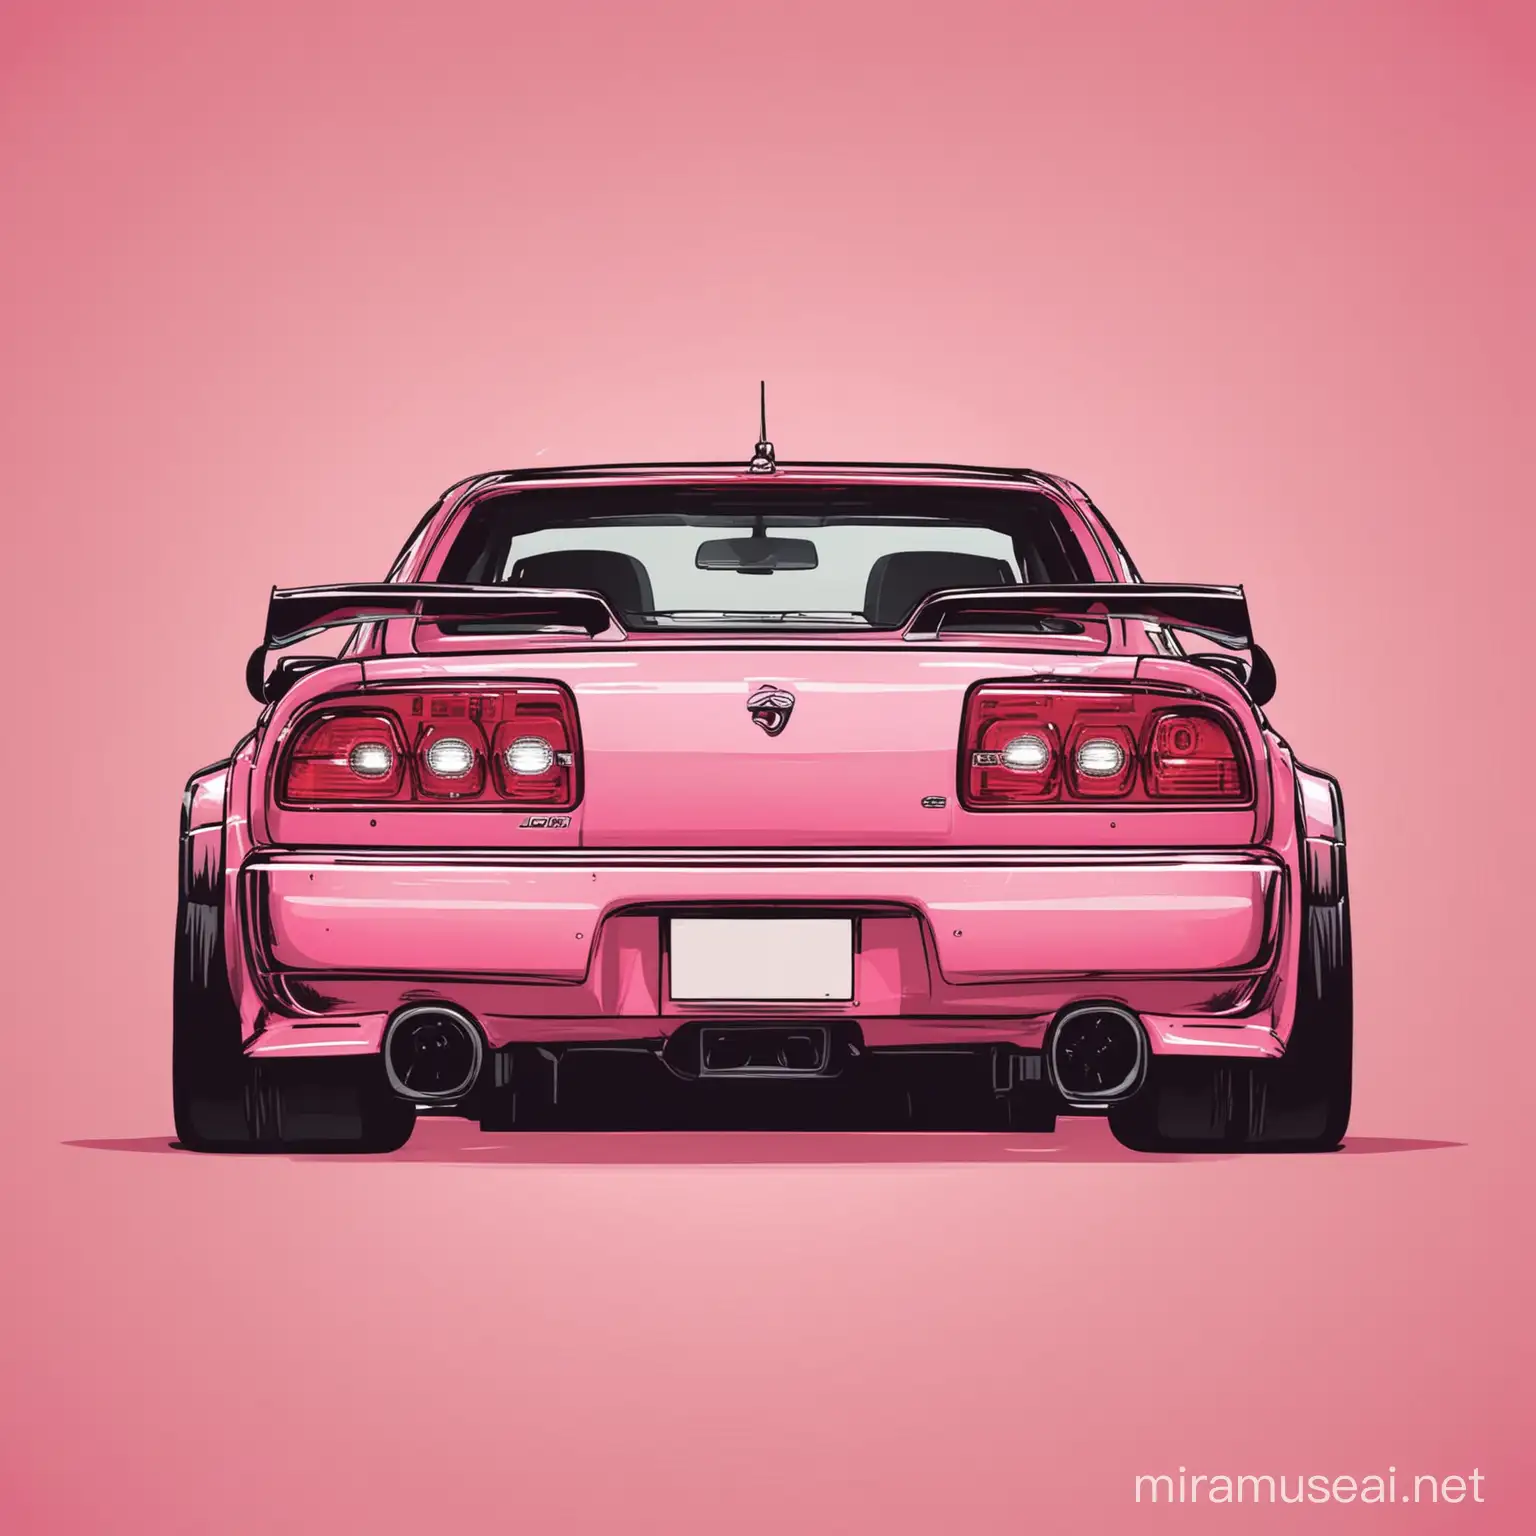 Pink JDM Car Vector Rear View Driving on Urban Road